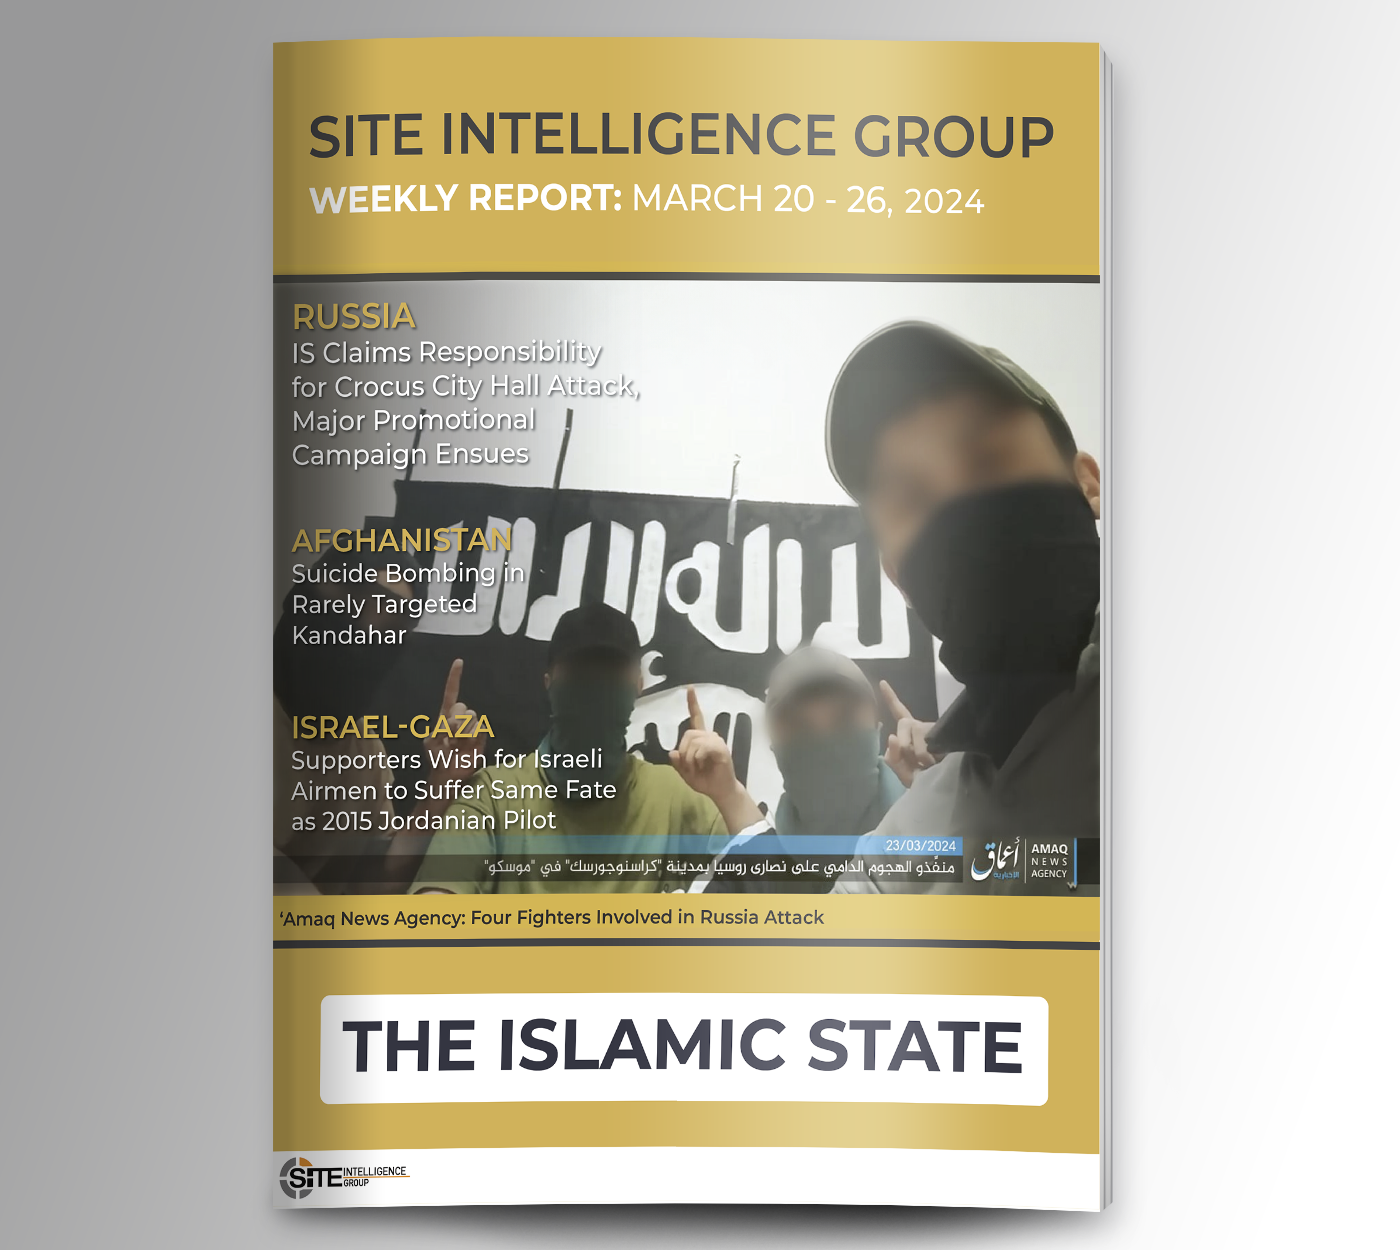 Weekly inSITE on the Islamic State for March 20-26, 2024